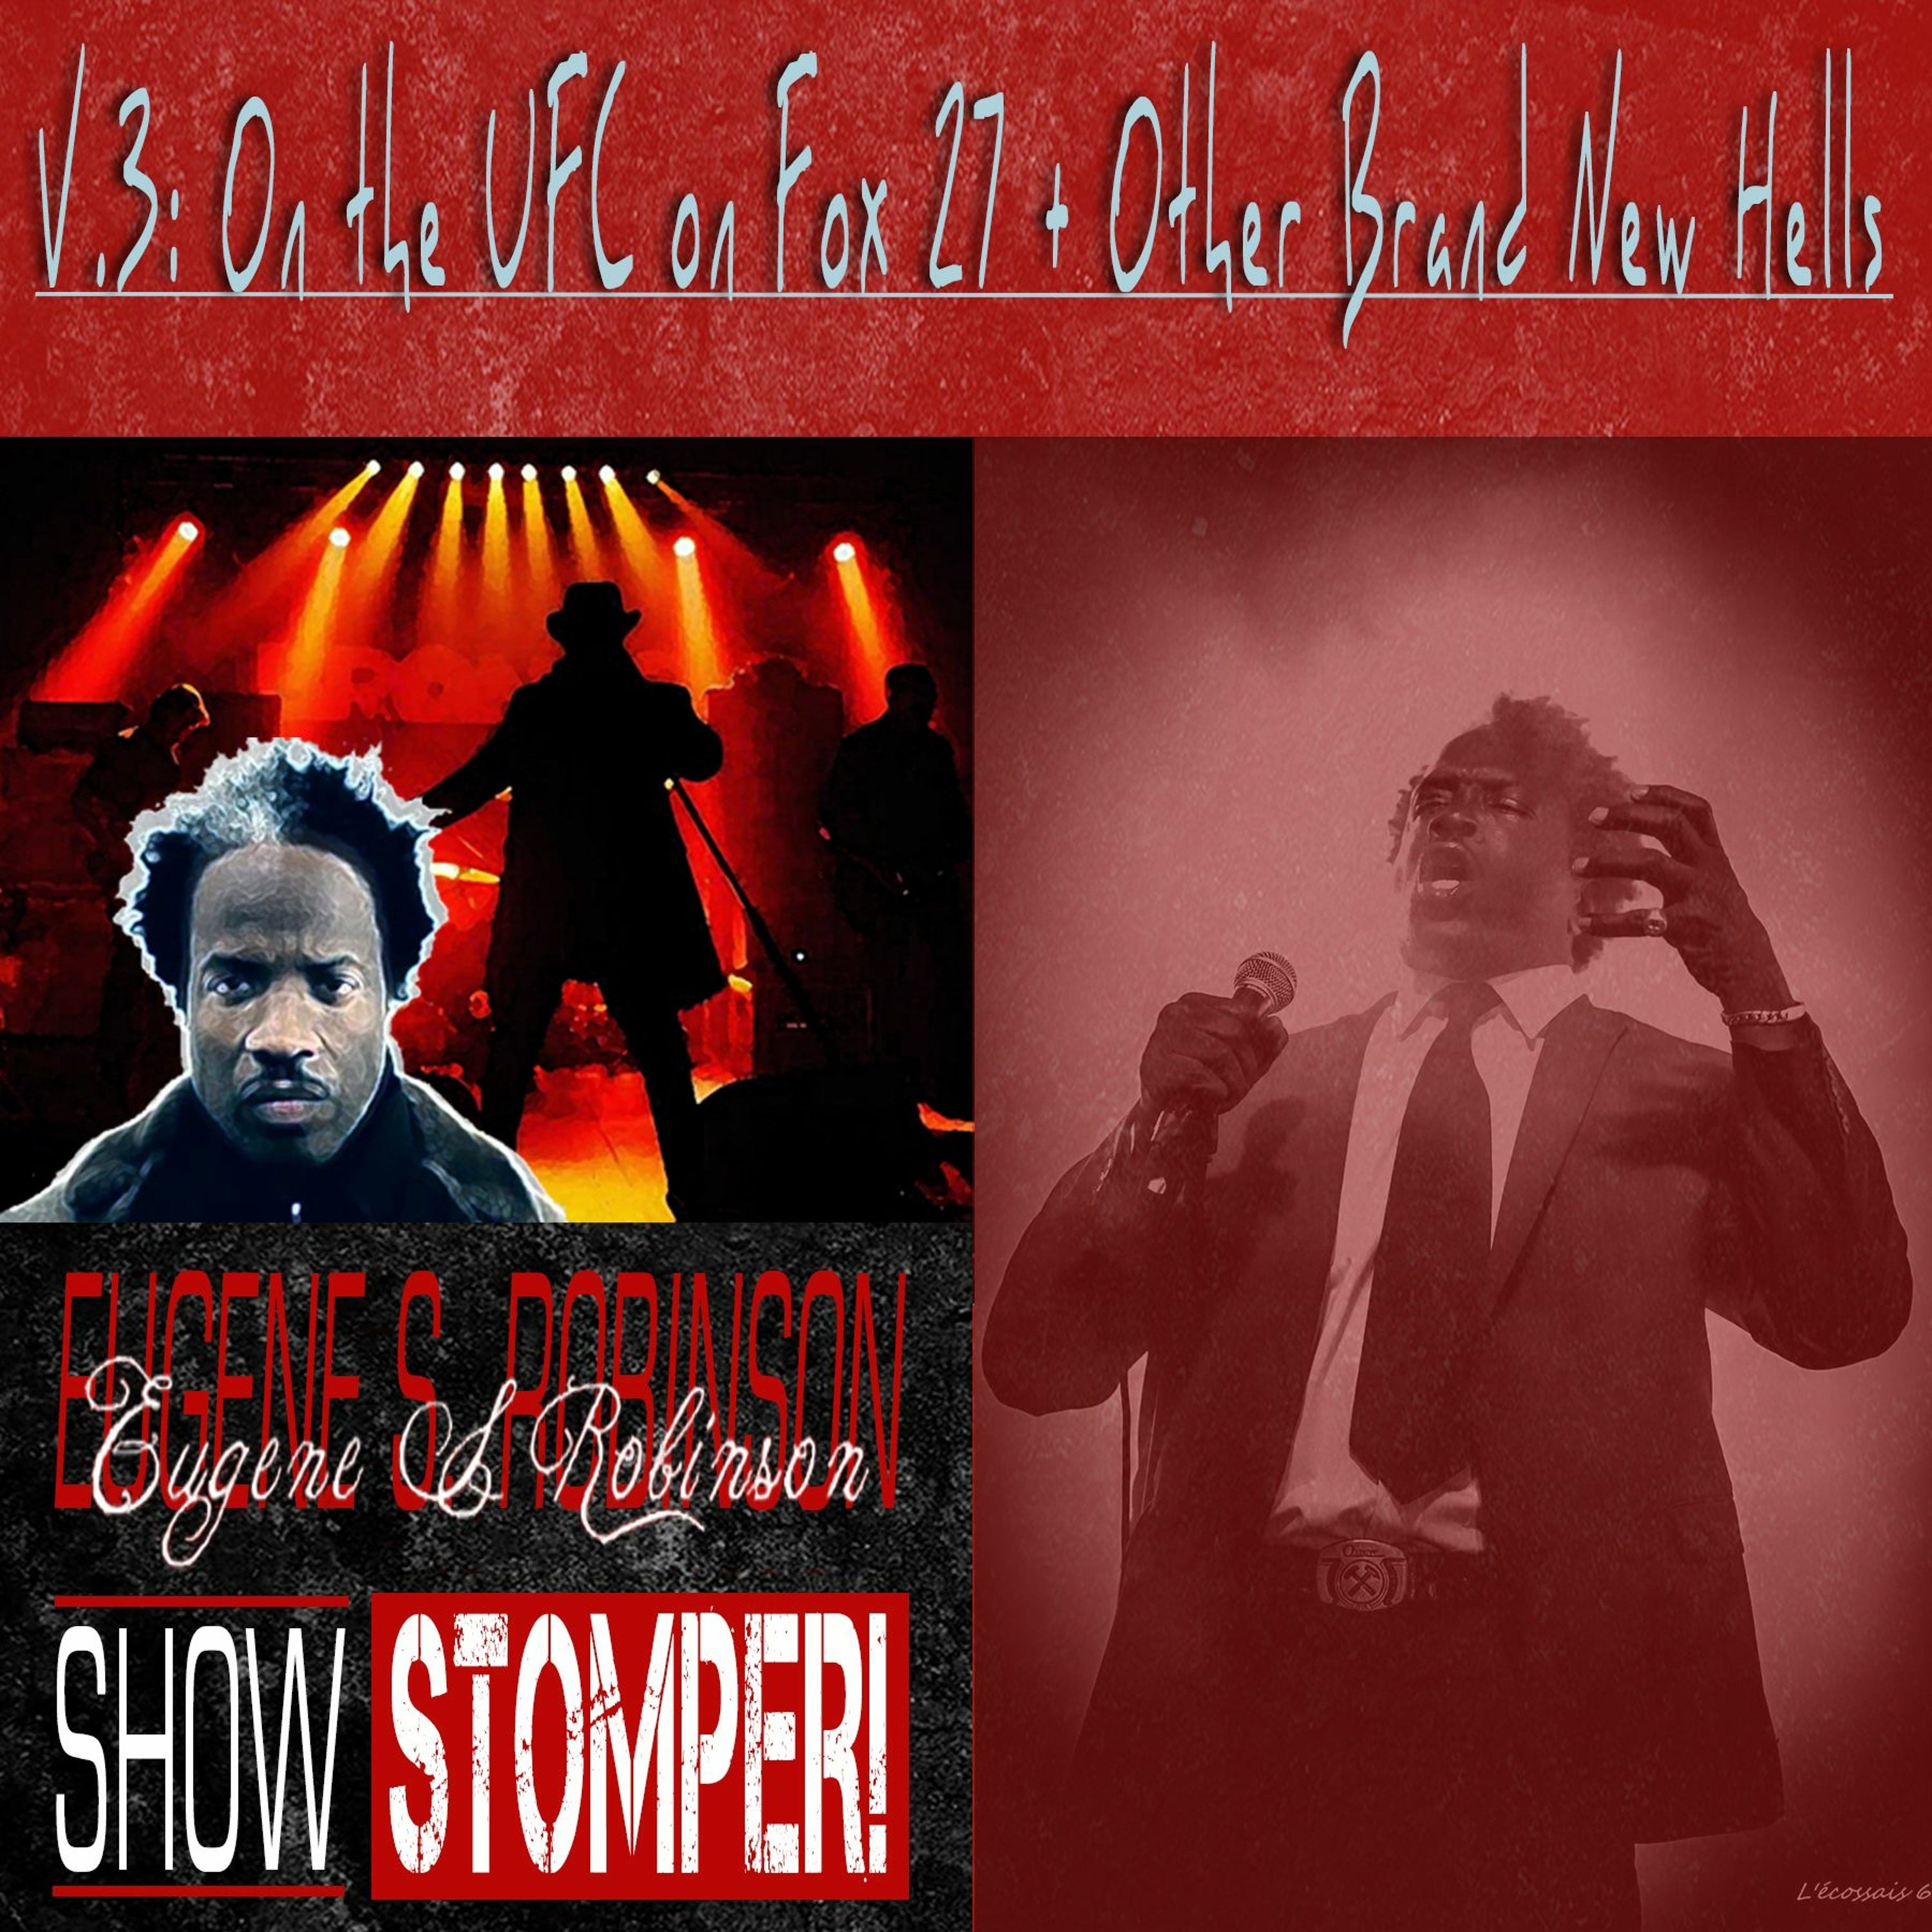 The Eugene S. Robinson Show Stomper! - V.3 UFC On Fox 27 + Other Brand New Hells